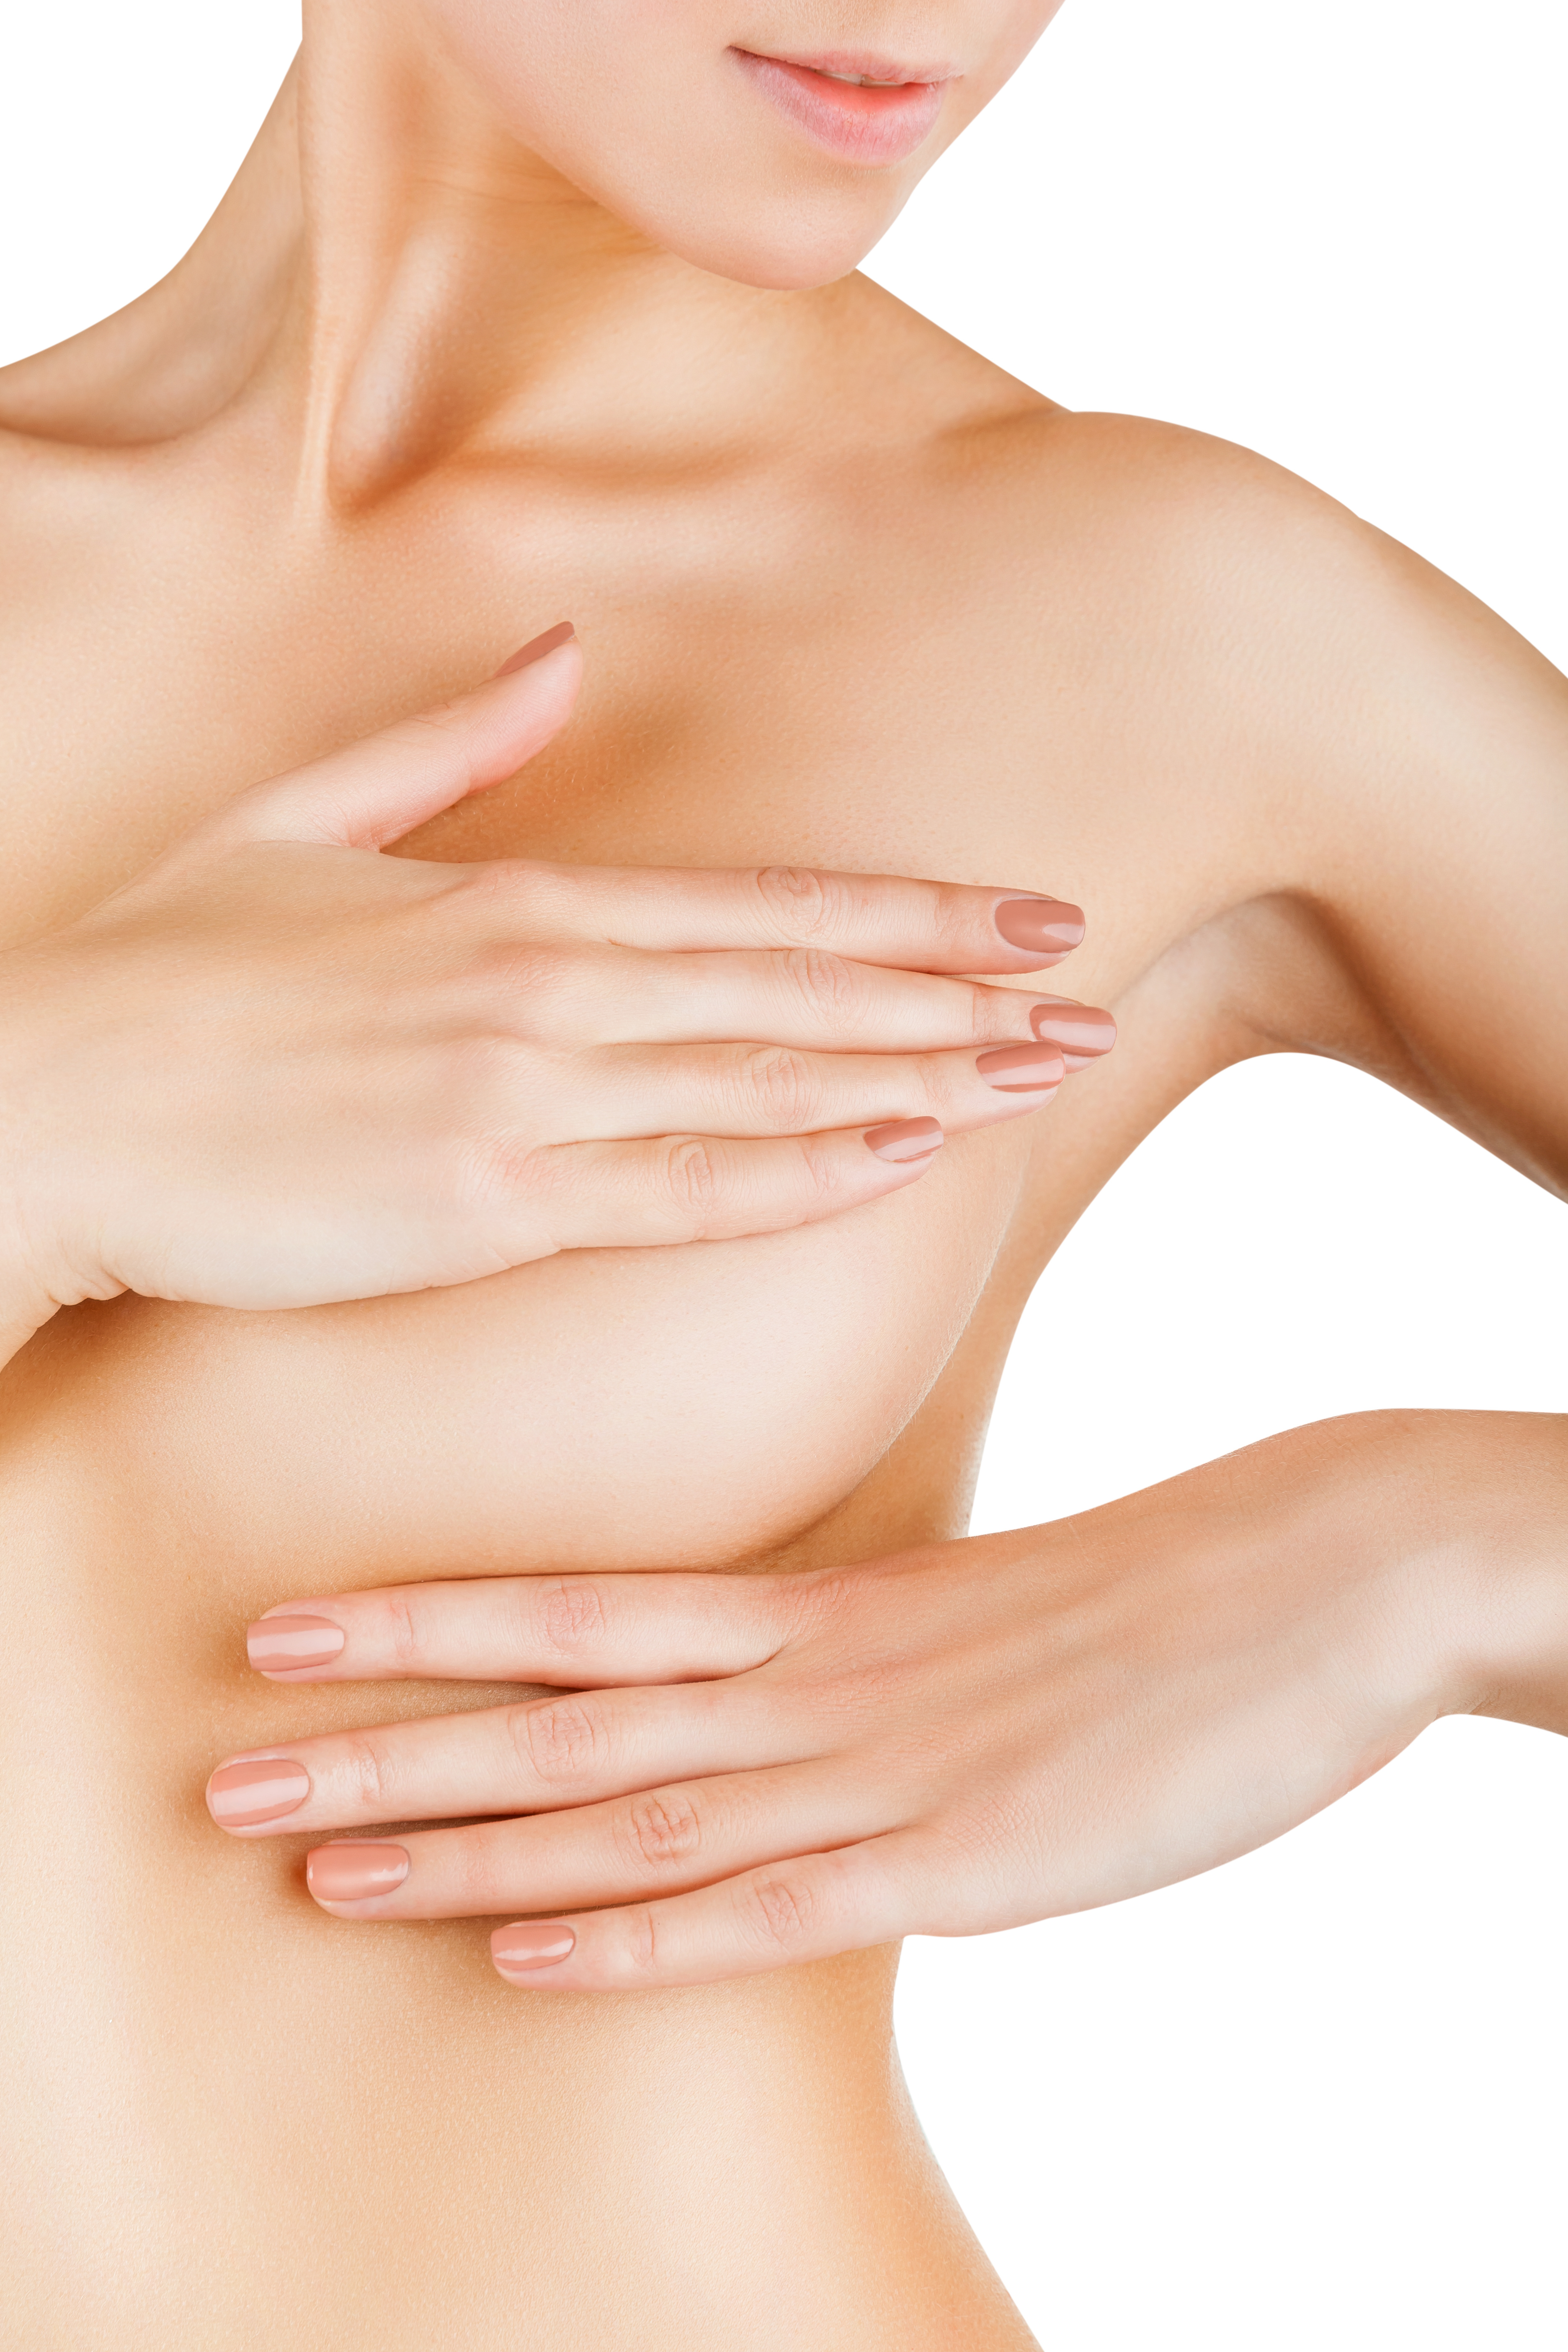 Young woman examining her breasts for signs of breast cancer isolated on white background